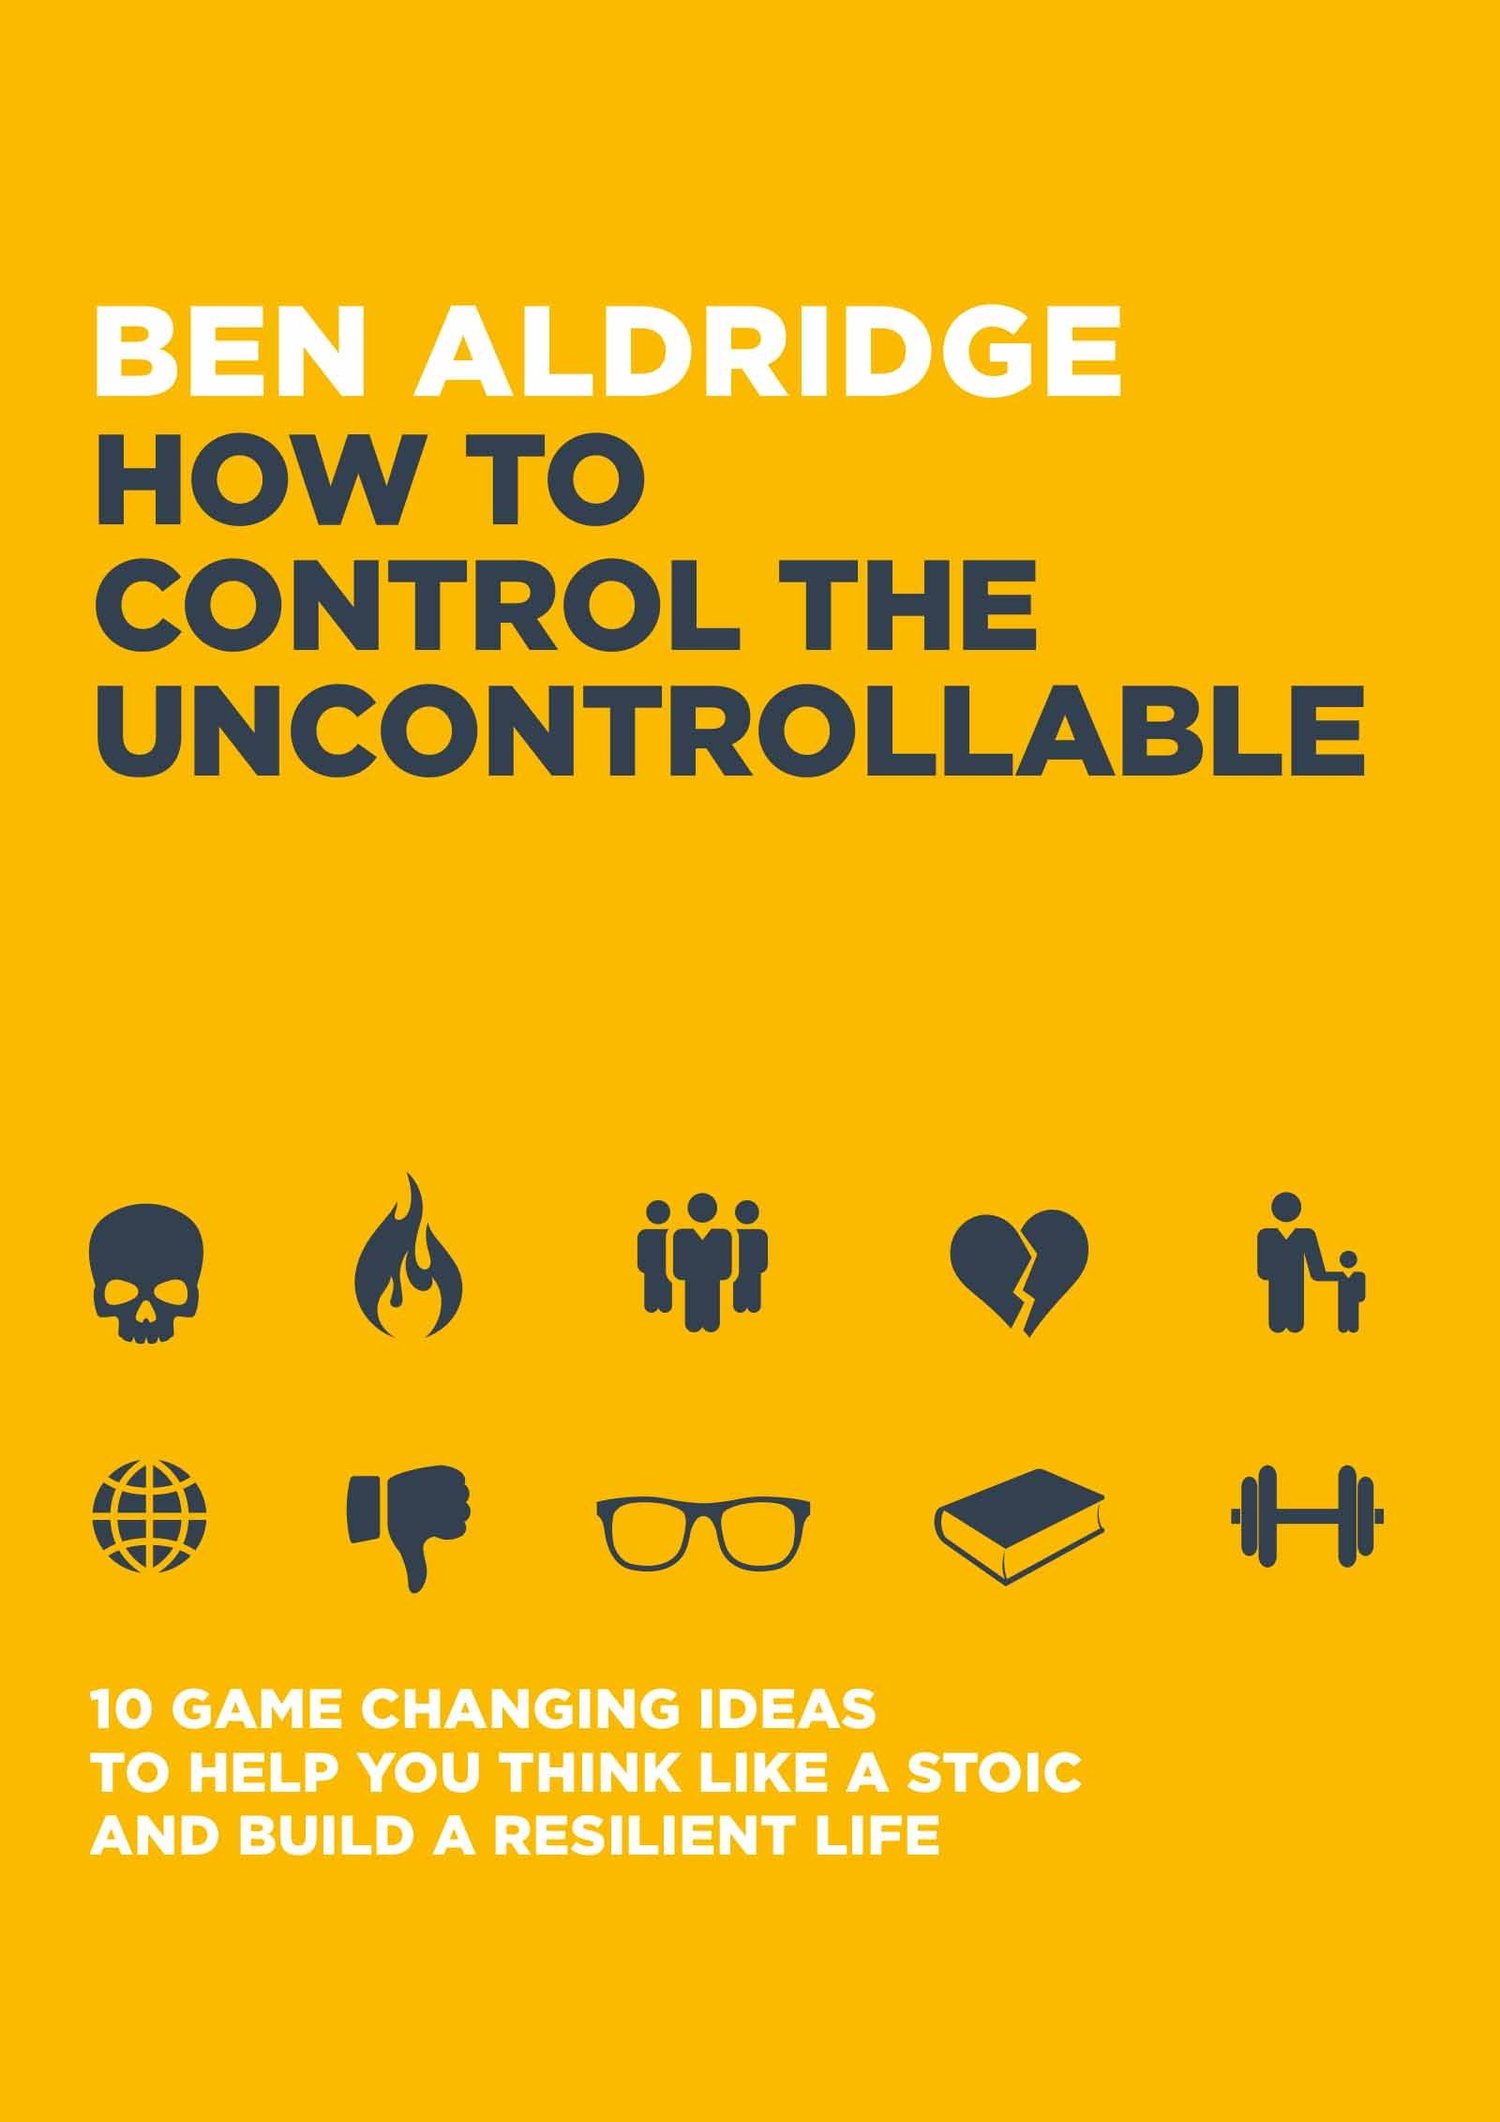 How to Control the Uncontrollable: 10 Game Changing Ideas to Help You Think Like a Stoic & Build a Resilient Life